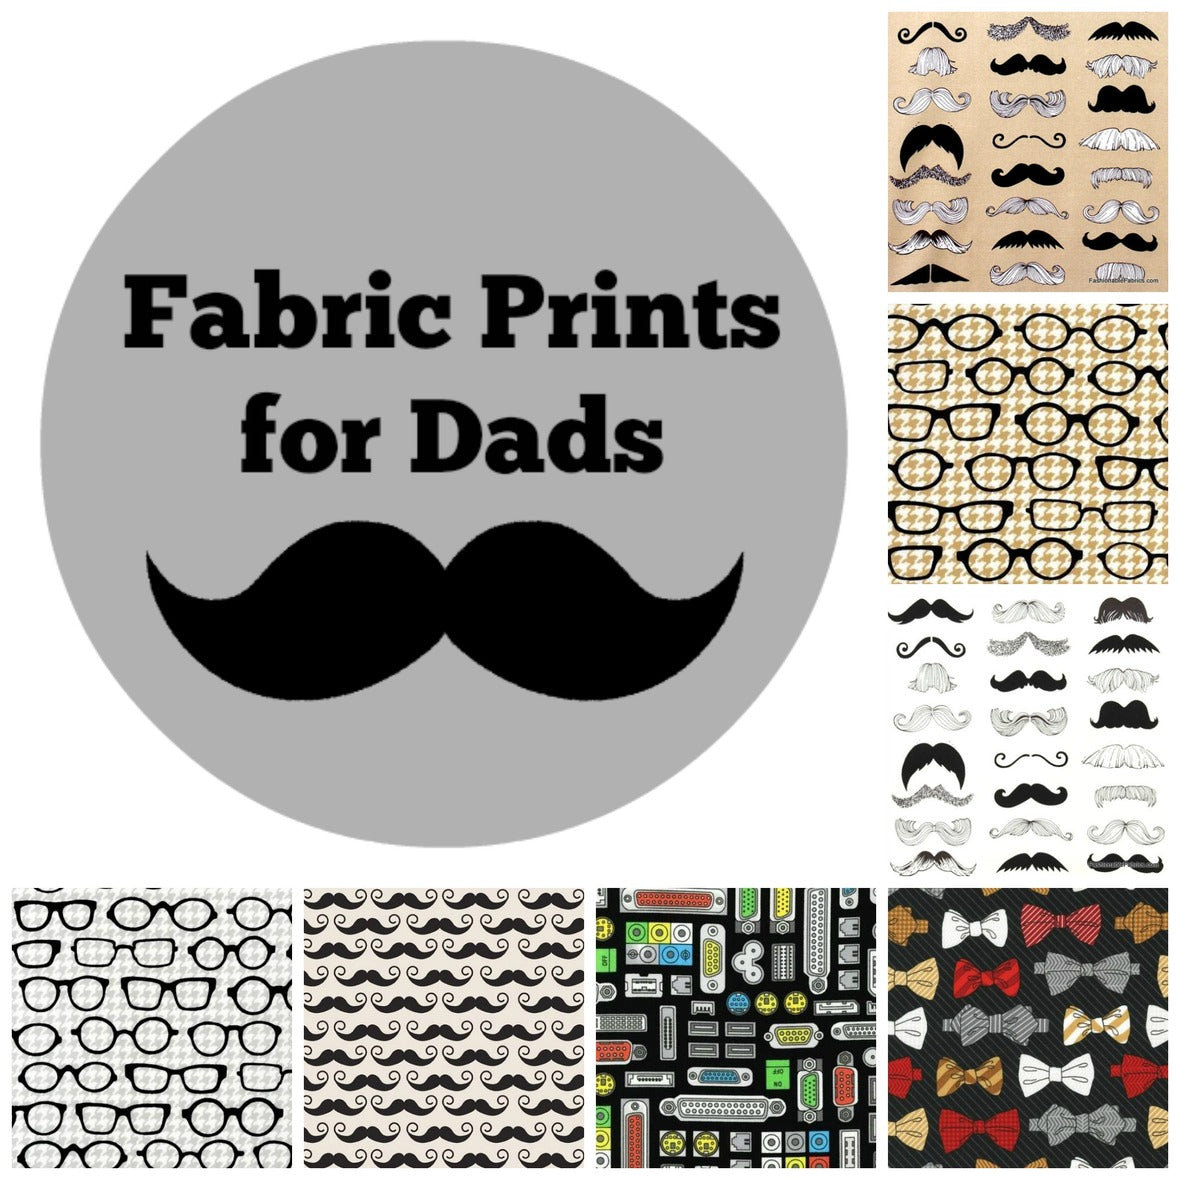 Fabric for Dads at Fashionable Fabrics